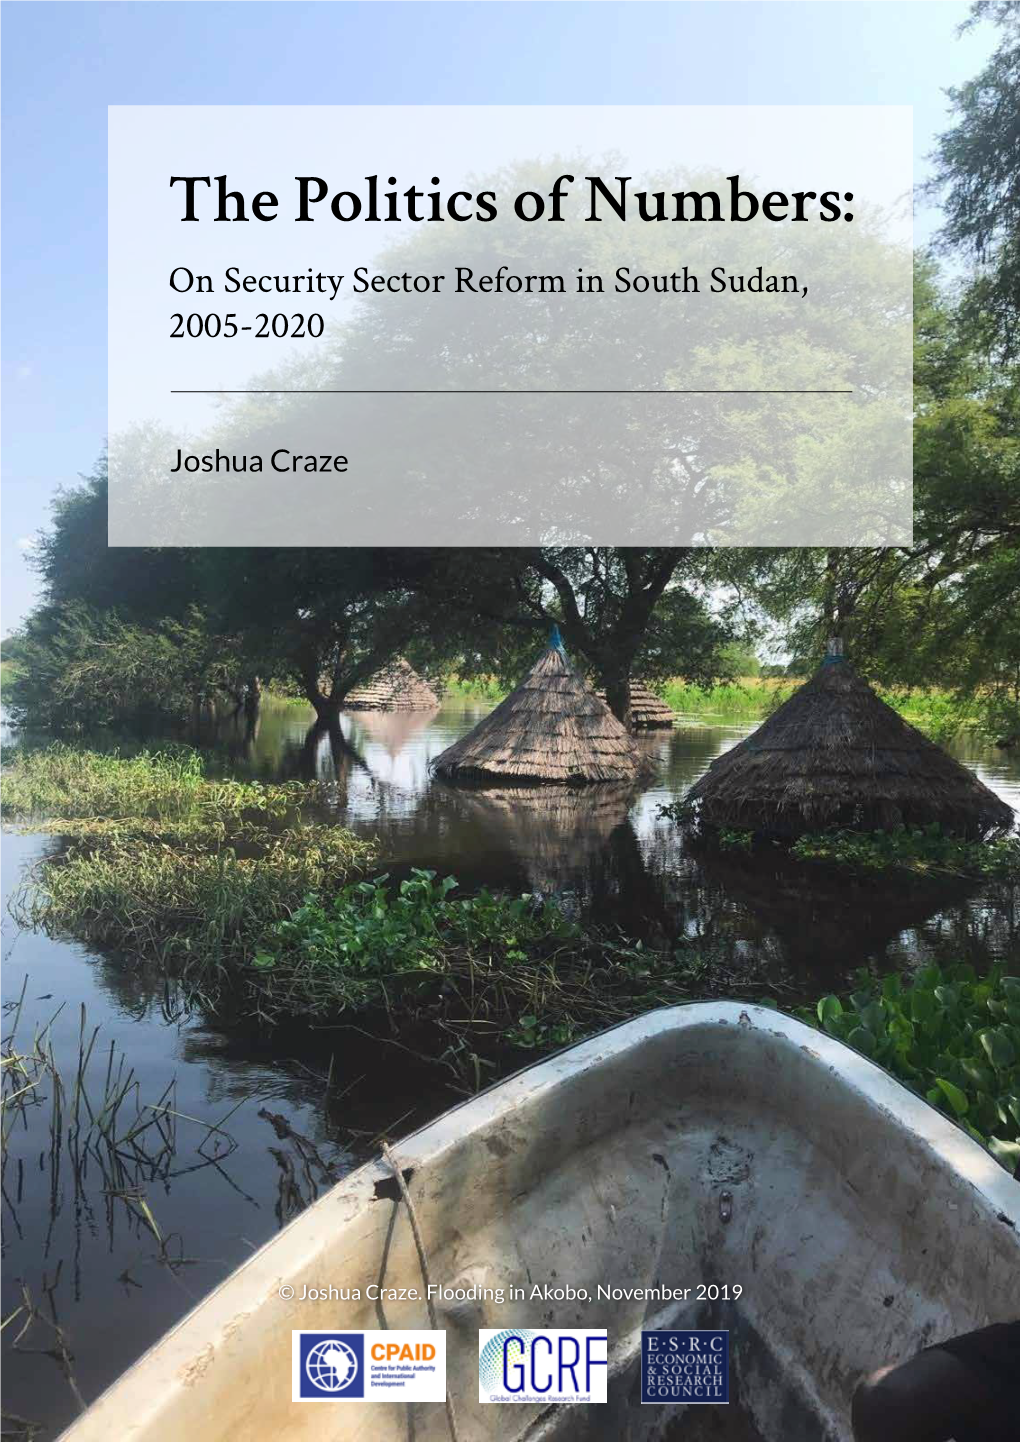 The Politics of Numbers: on Security Sector Reform in South Sudan, 2005-2020